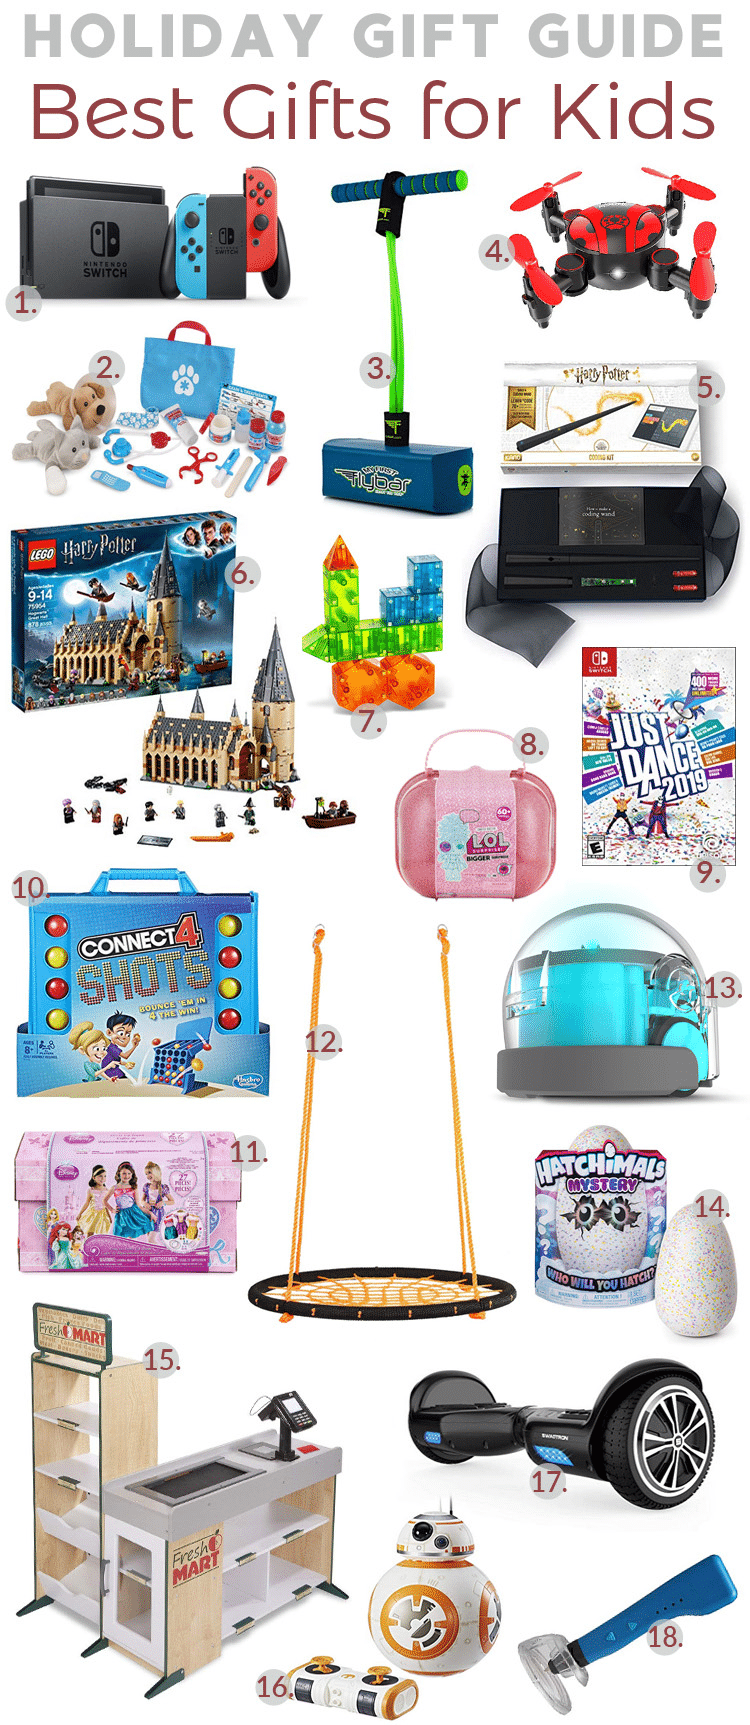 The 20 Best Holiday Gift Ideas for Kids This Year!